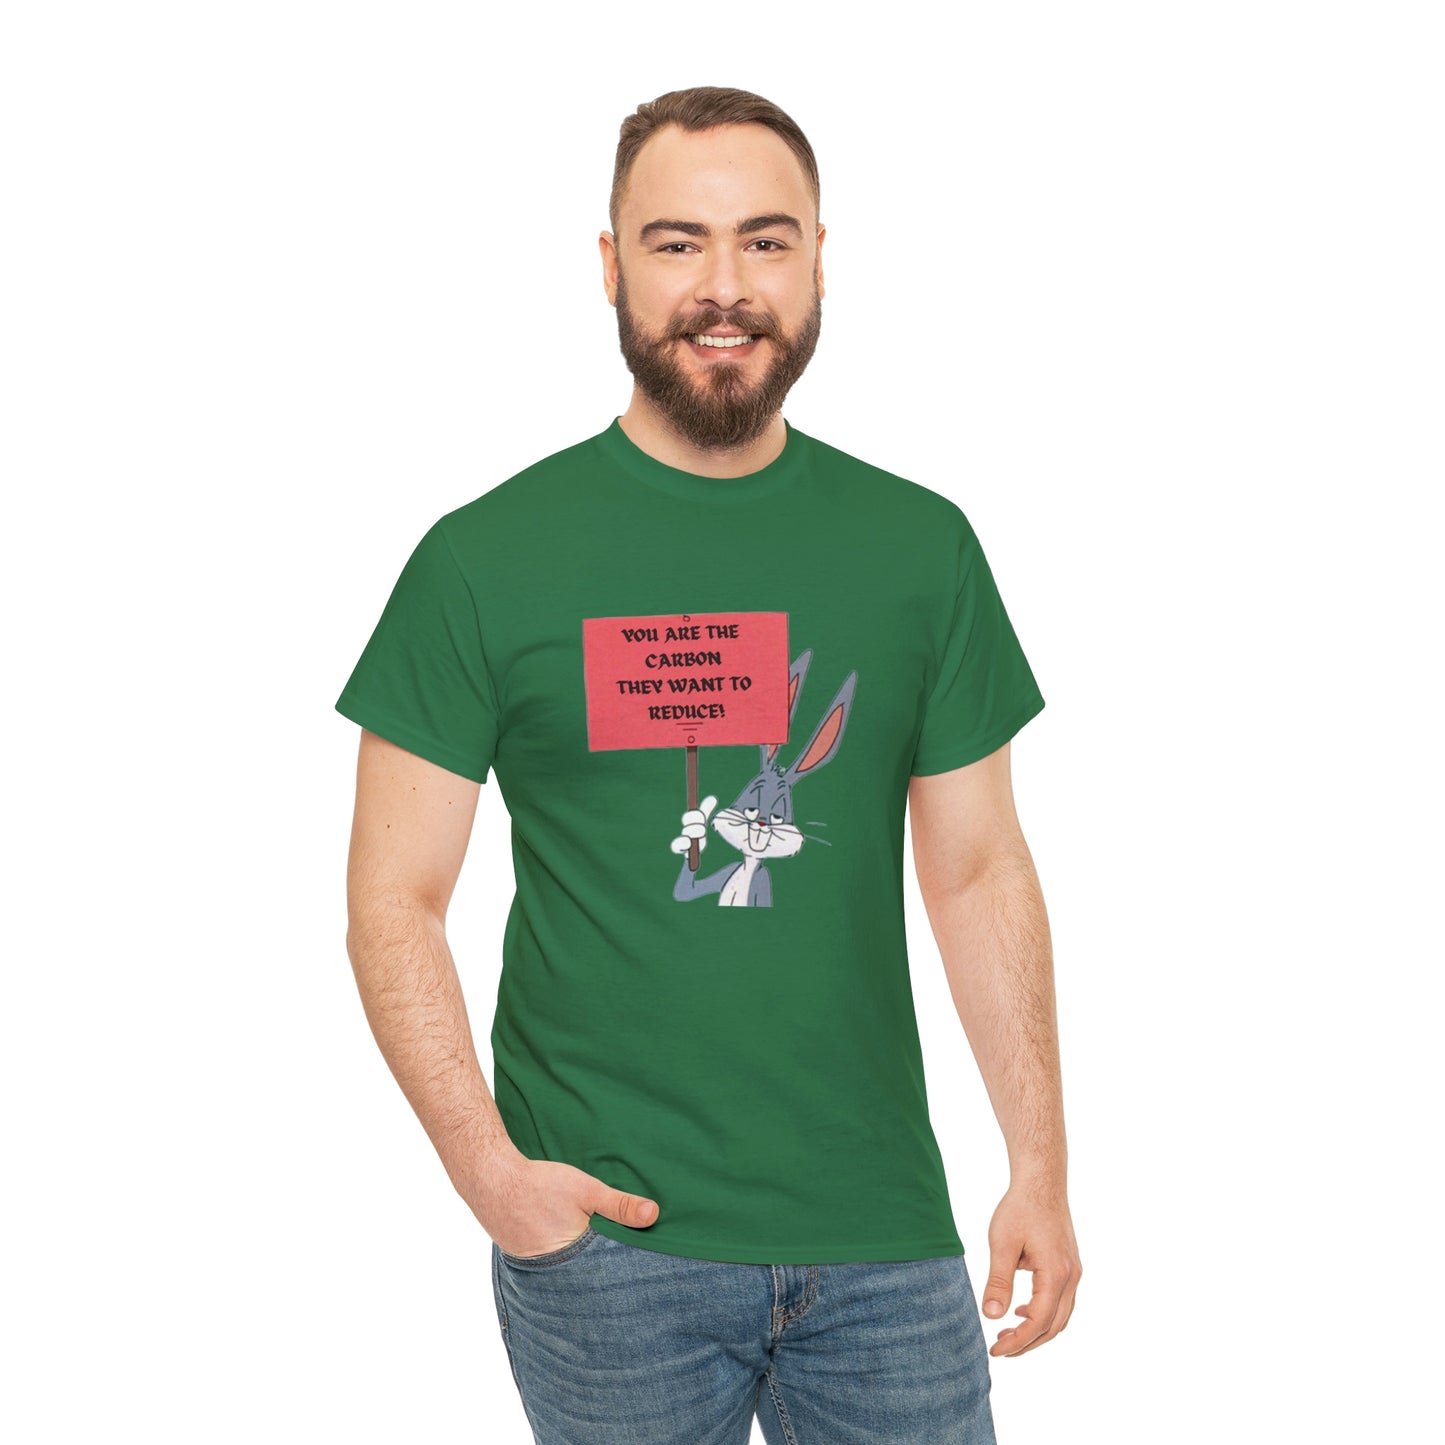 You Are The Carbon They Want to Reduce! Agenda 2030 Heavy Cotton T-Shirt